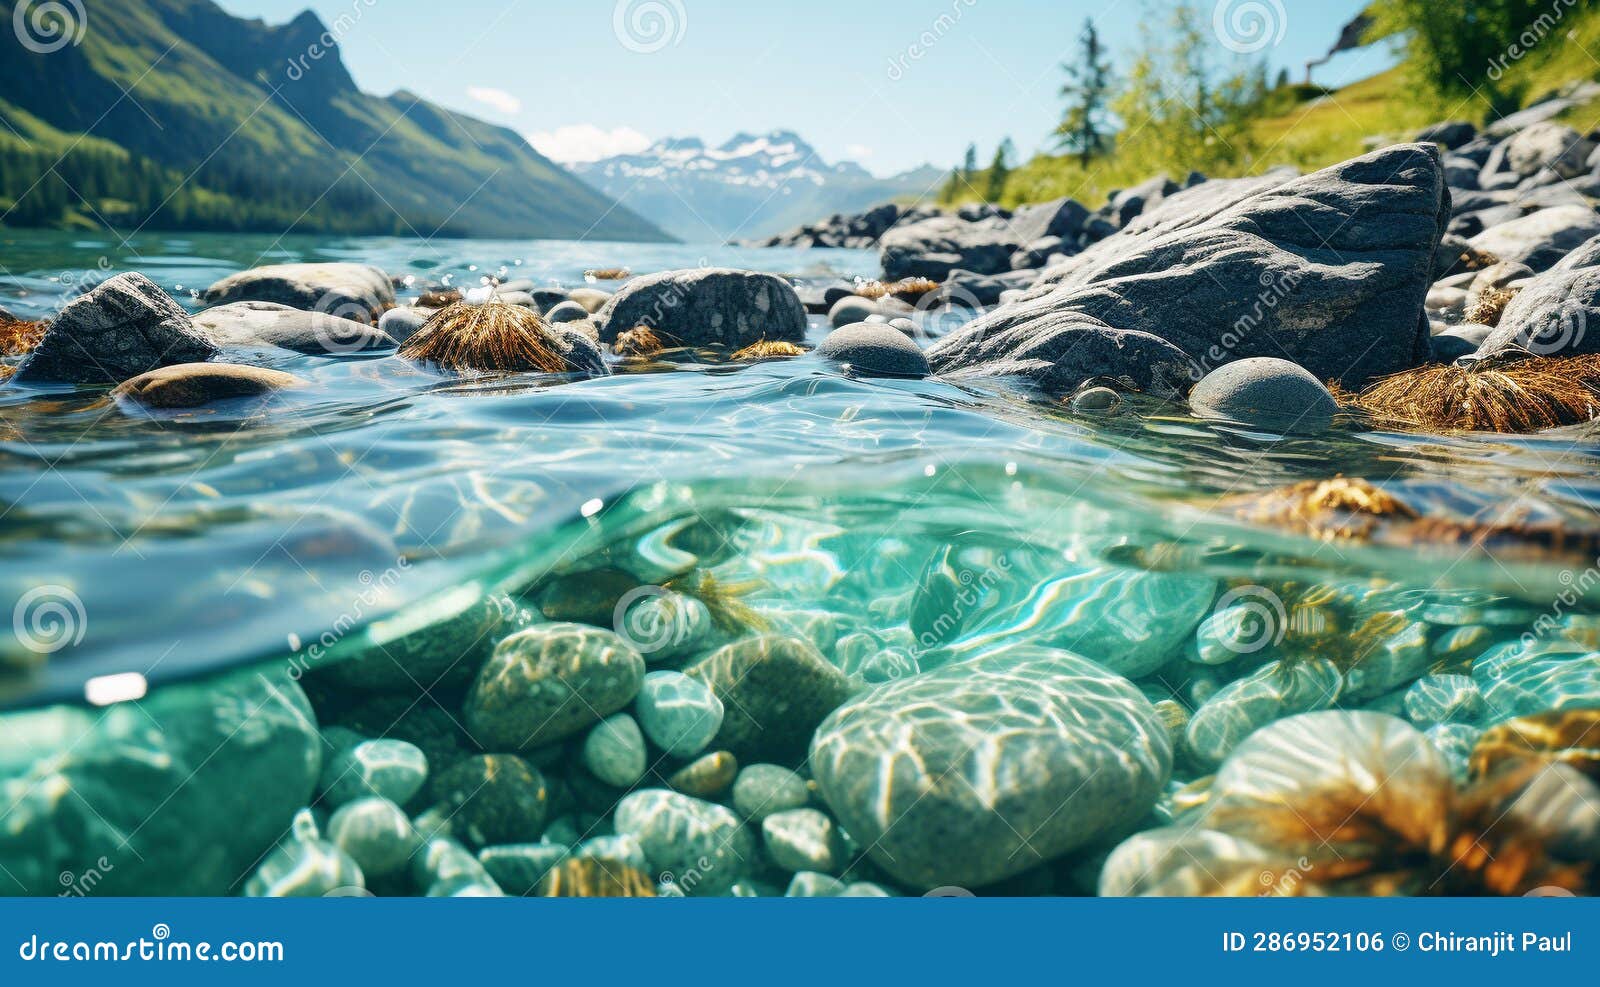 Breathtaking Shot Of Beautiful Stones Under Turquoise Water Of A Lake And Hills In The Background